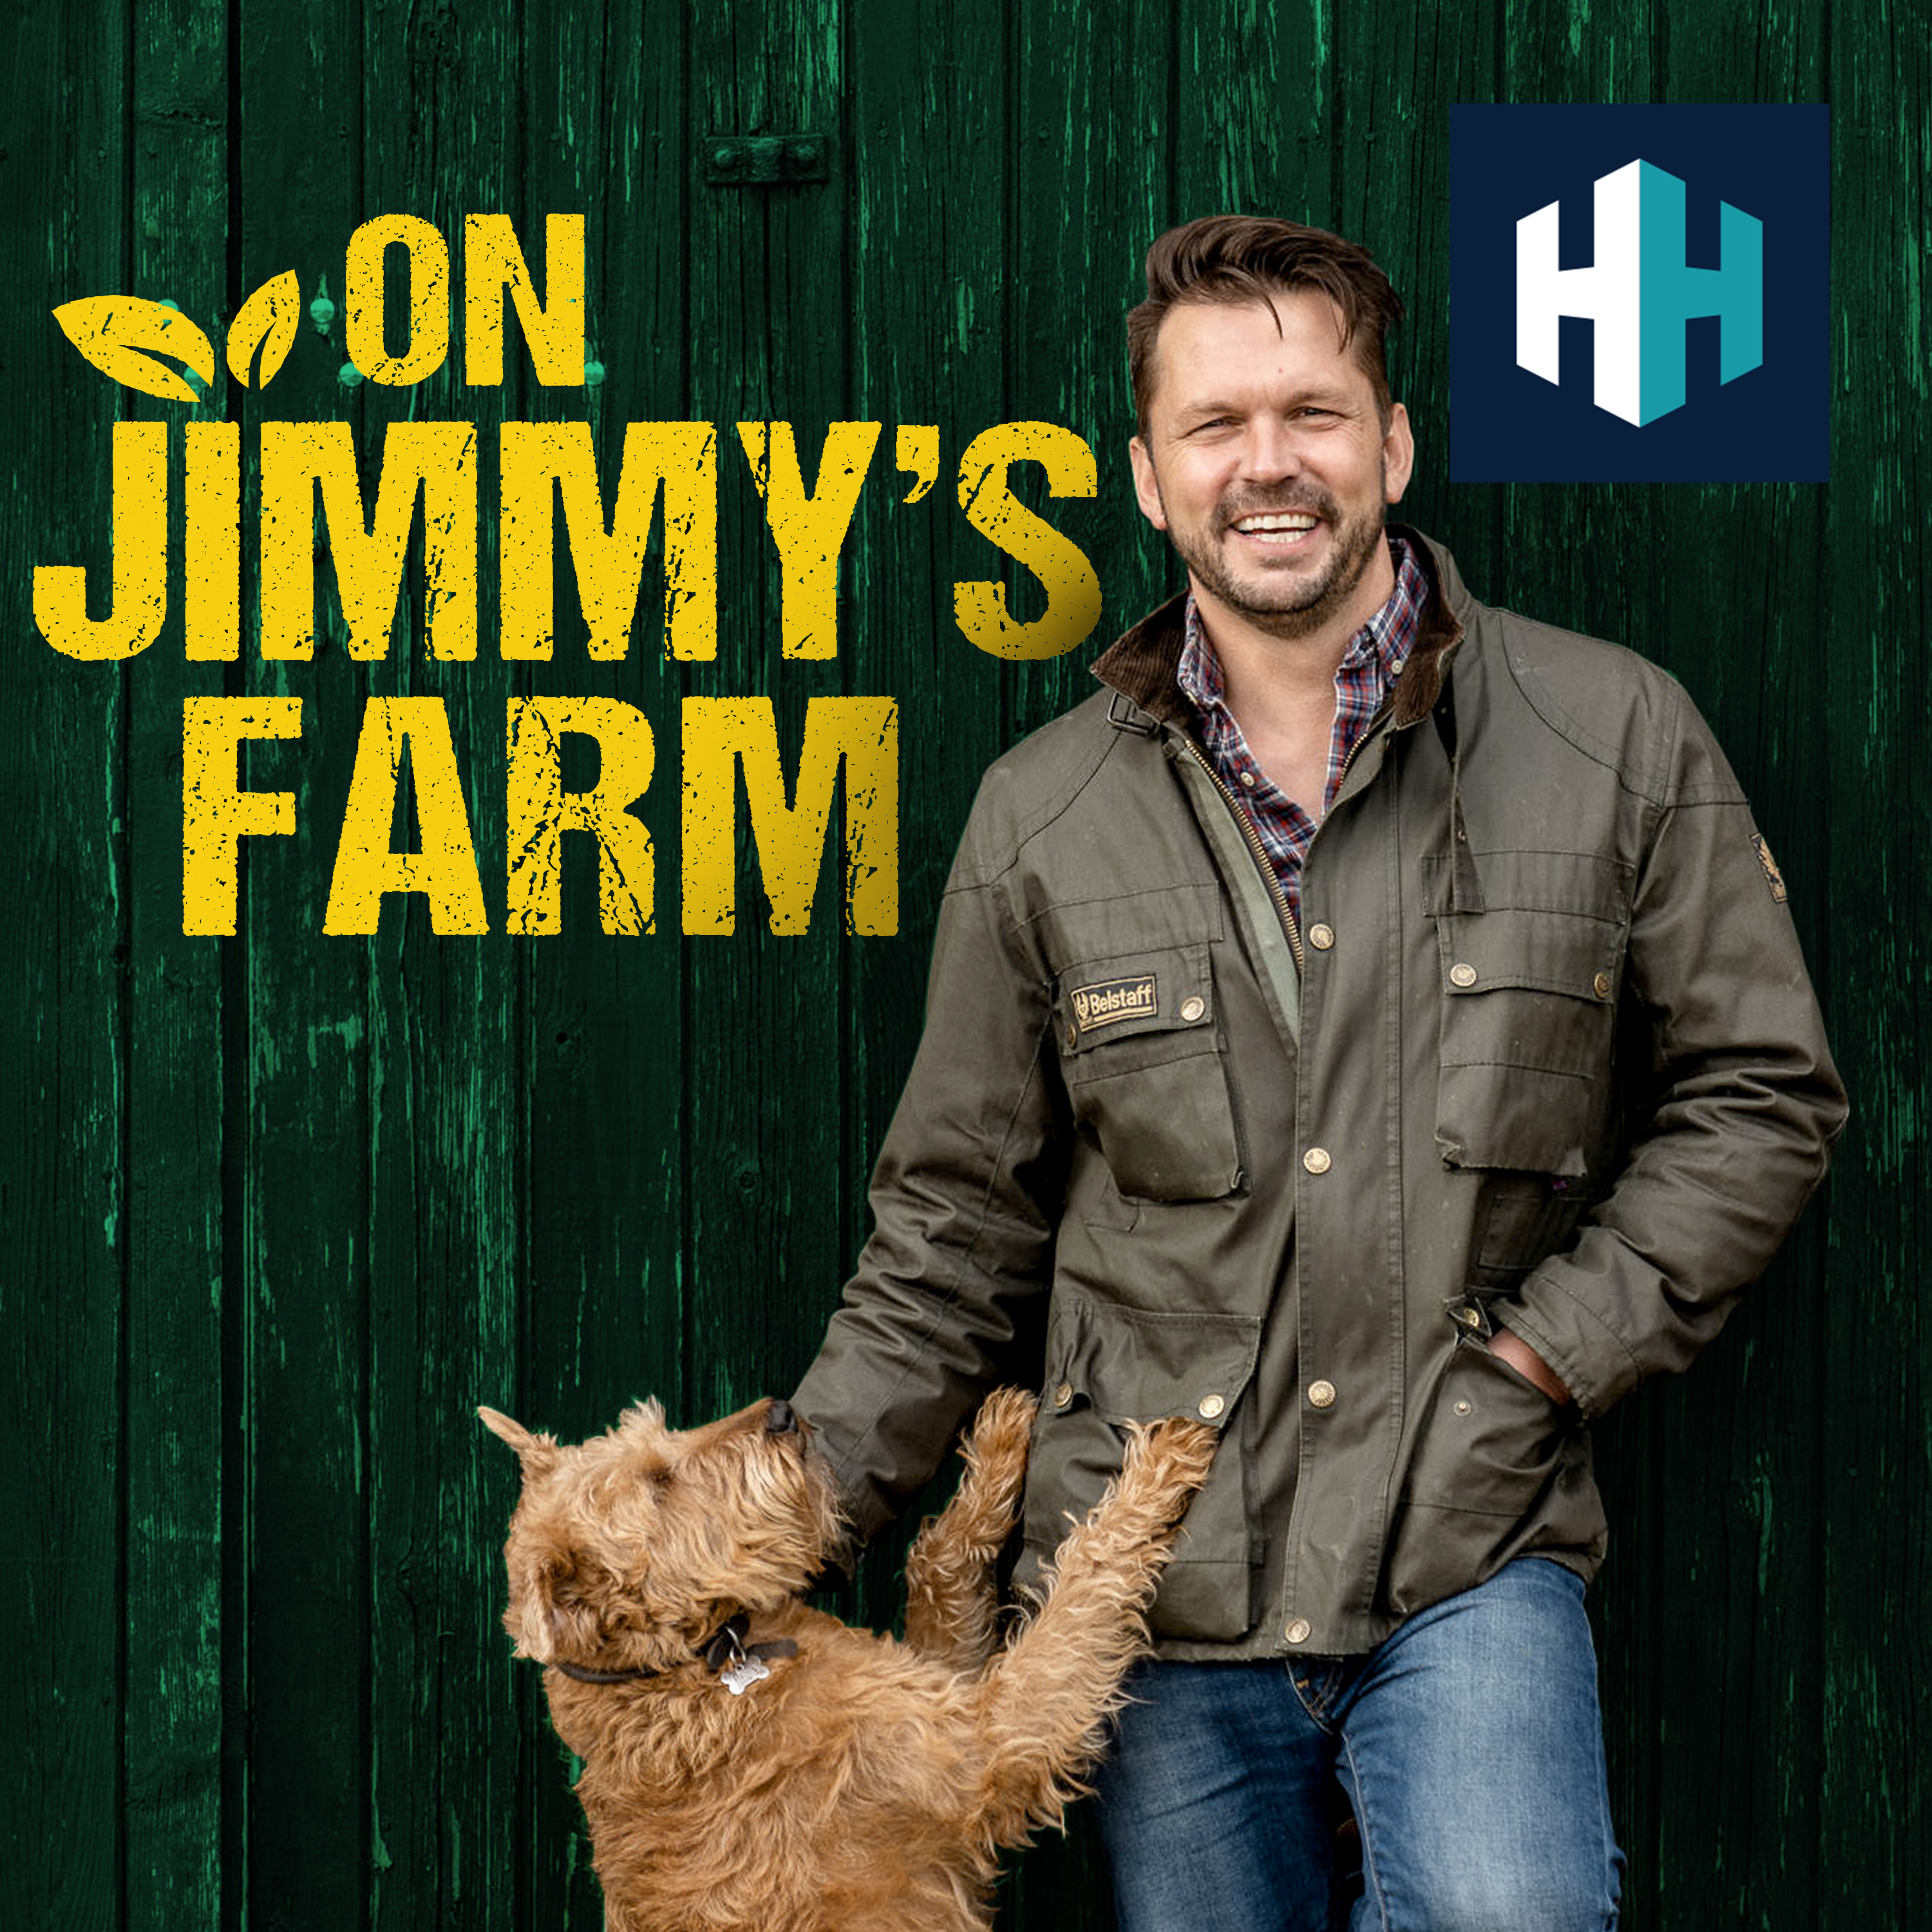 Welcome to Jimmy's Farm